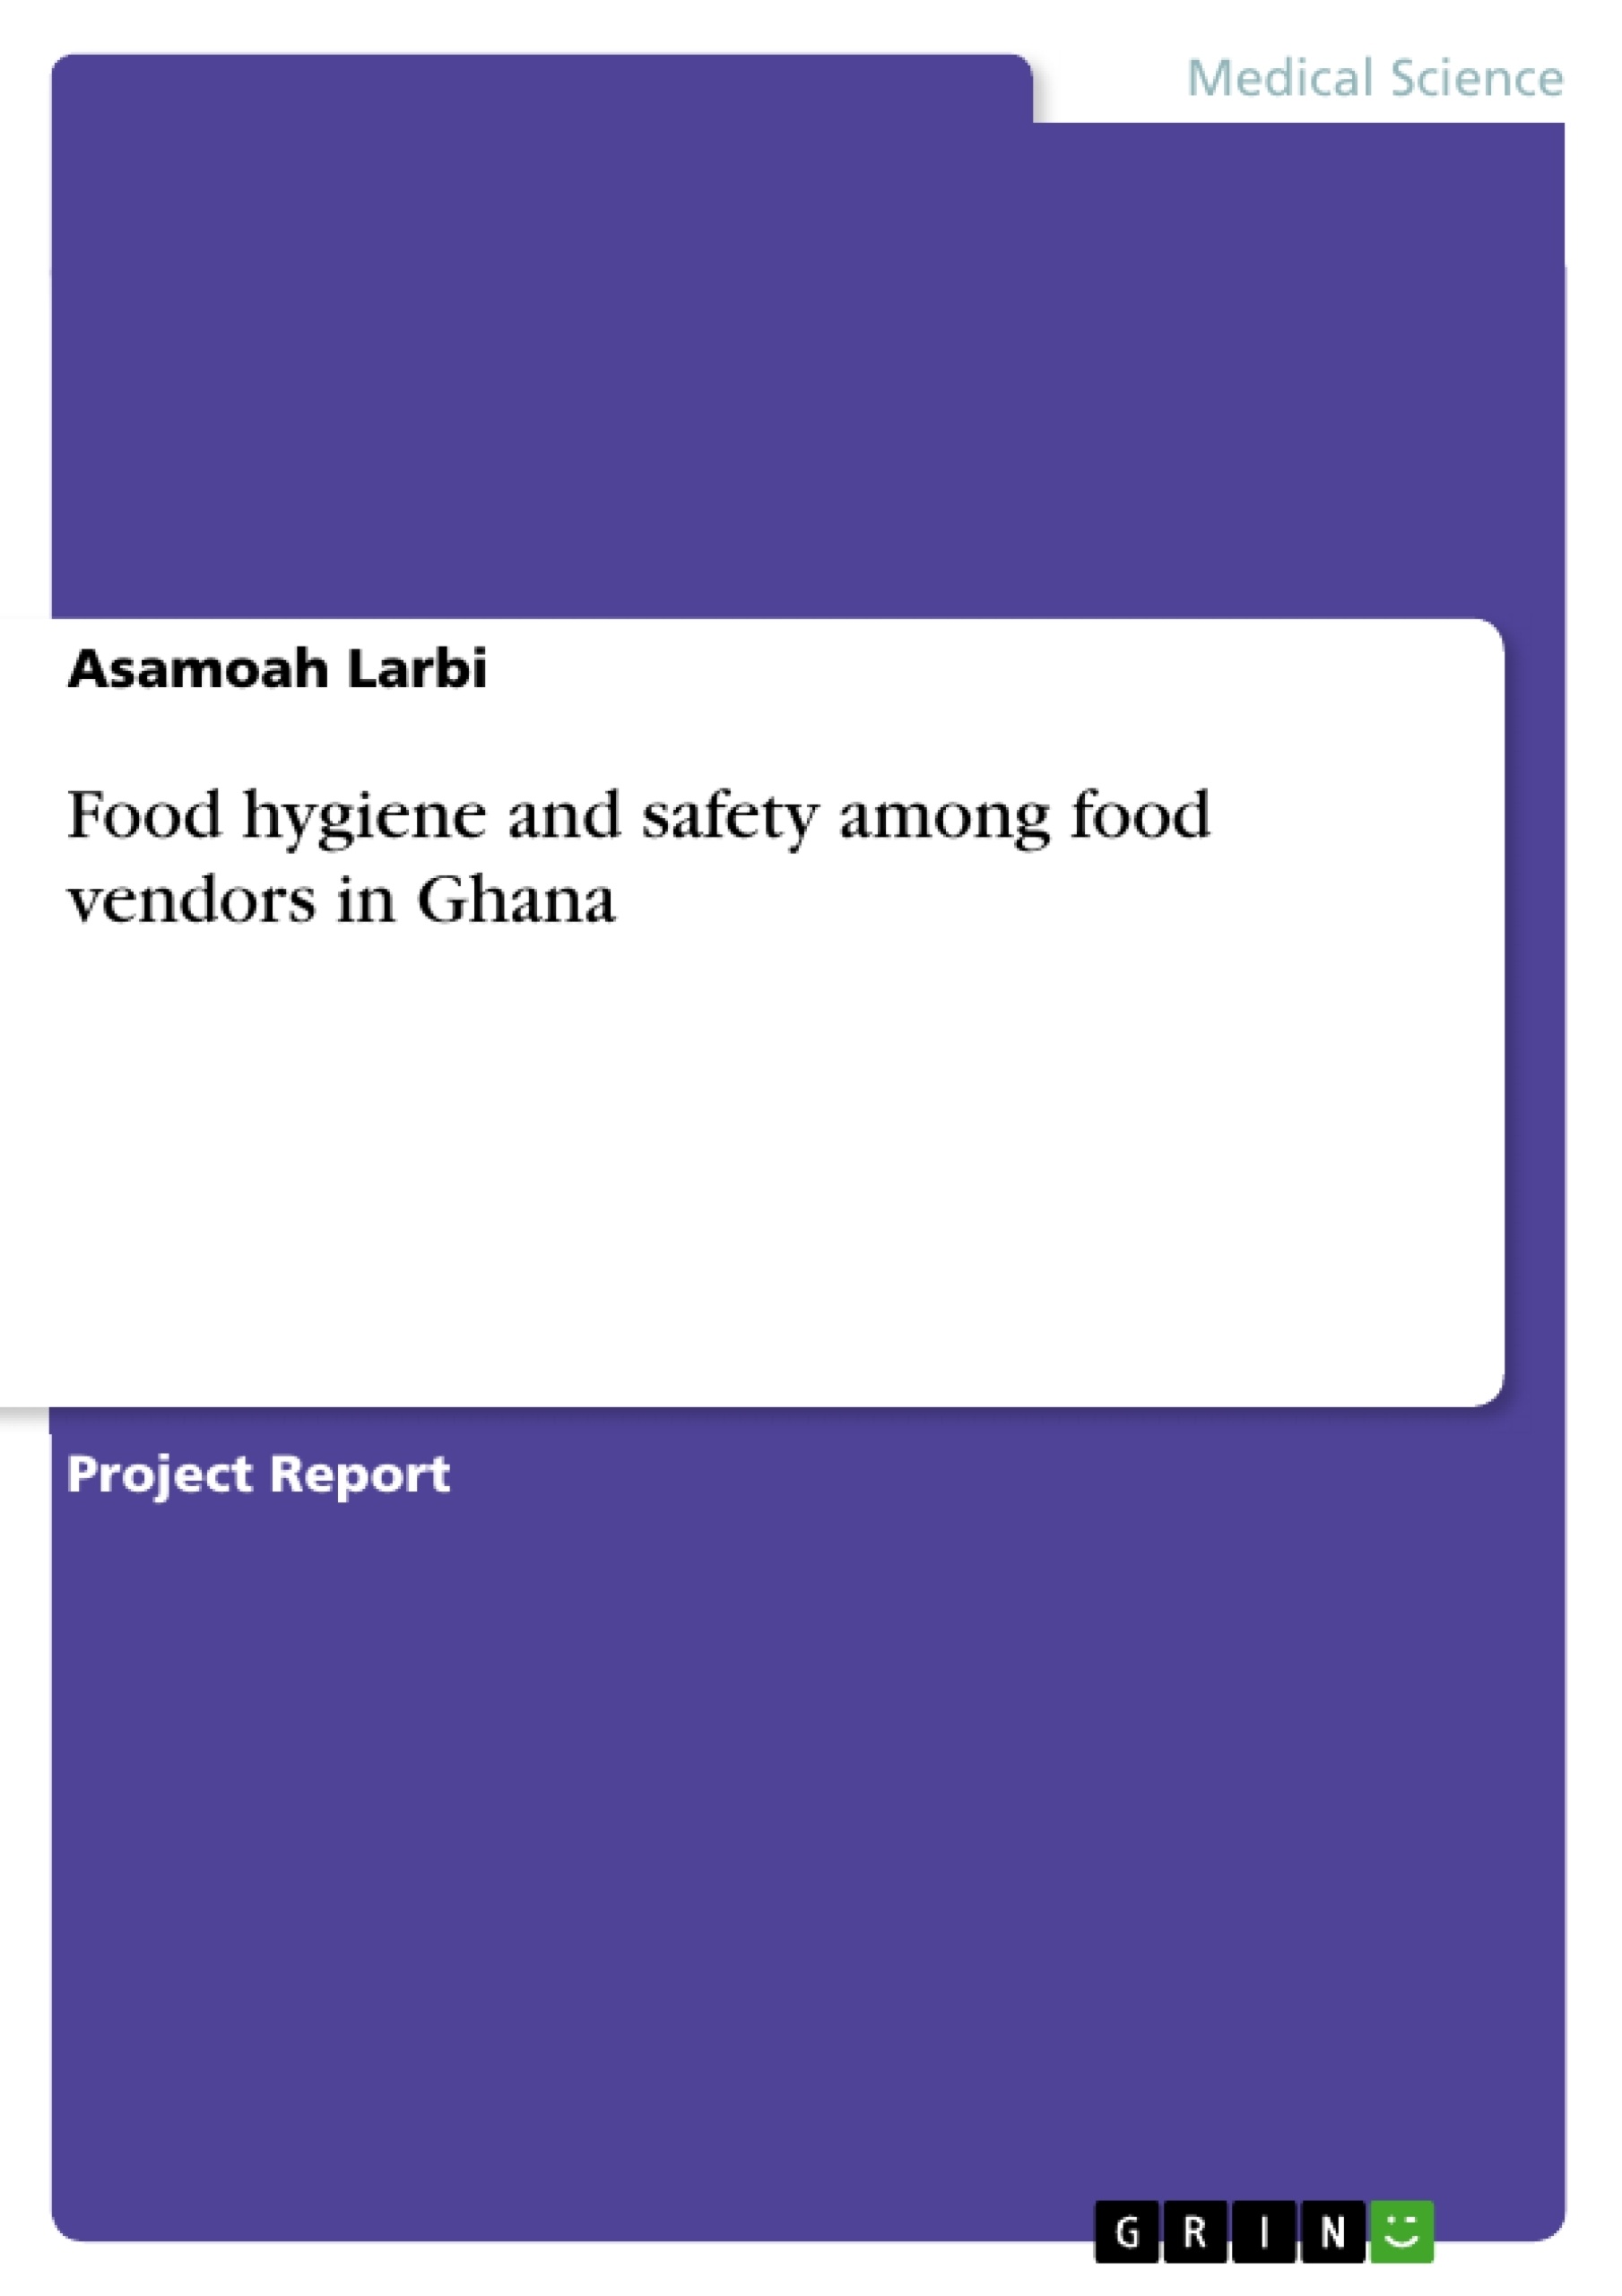 Title: Food hygiene and safety among food vendors in Ghana